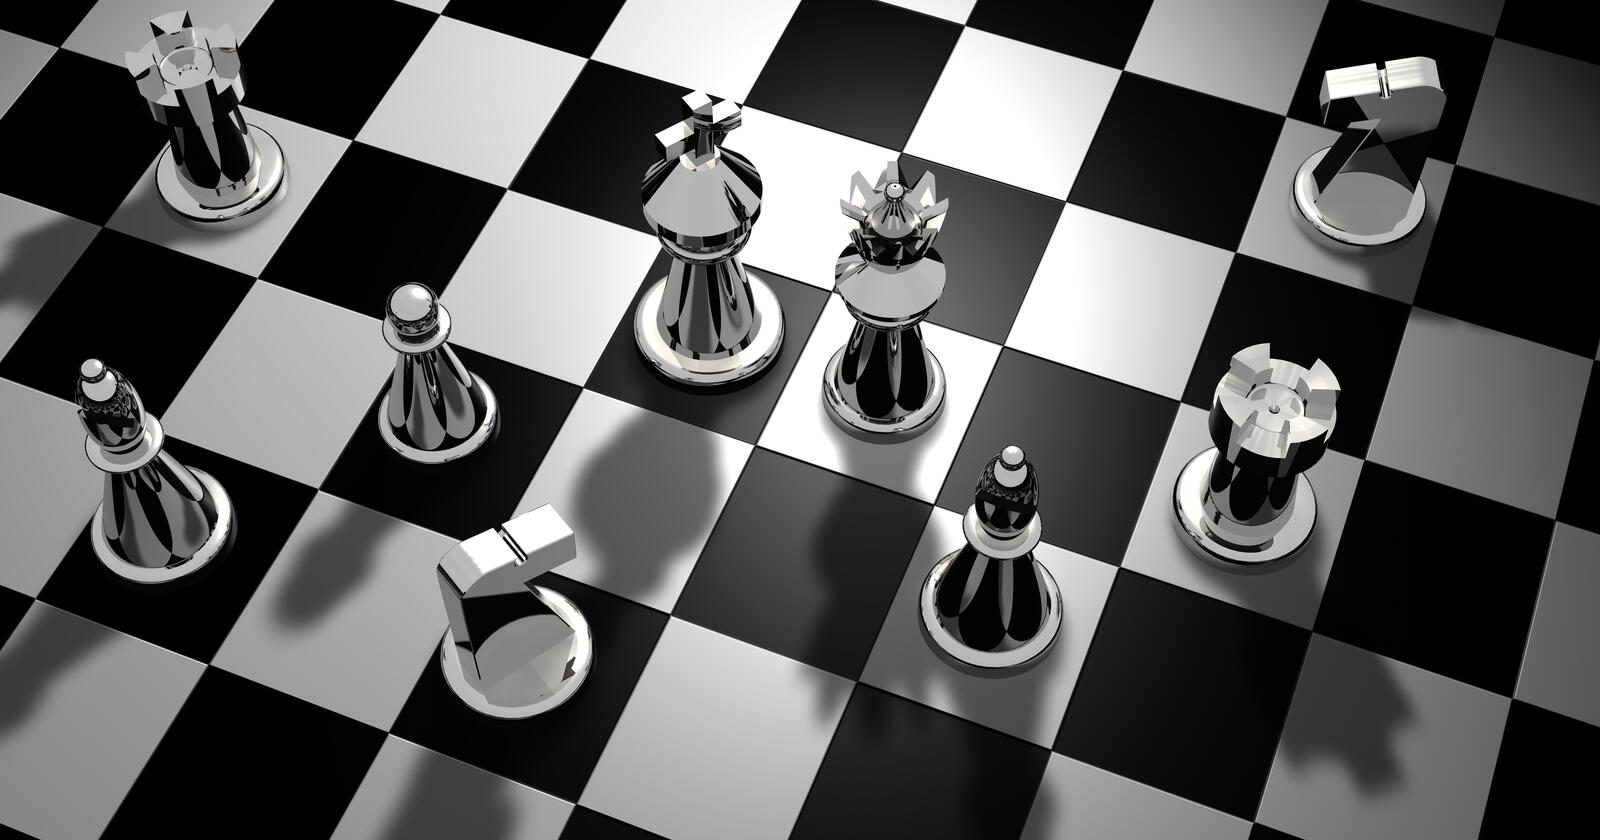 Wallpapers monochrome chess shadow on the desktop